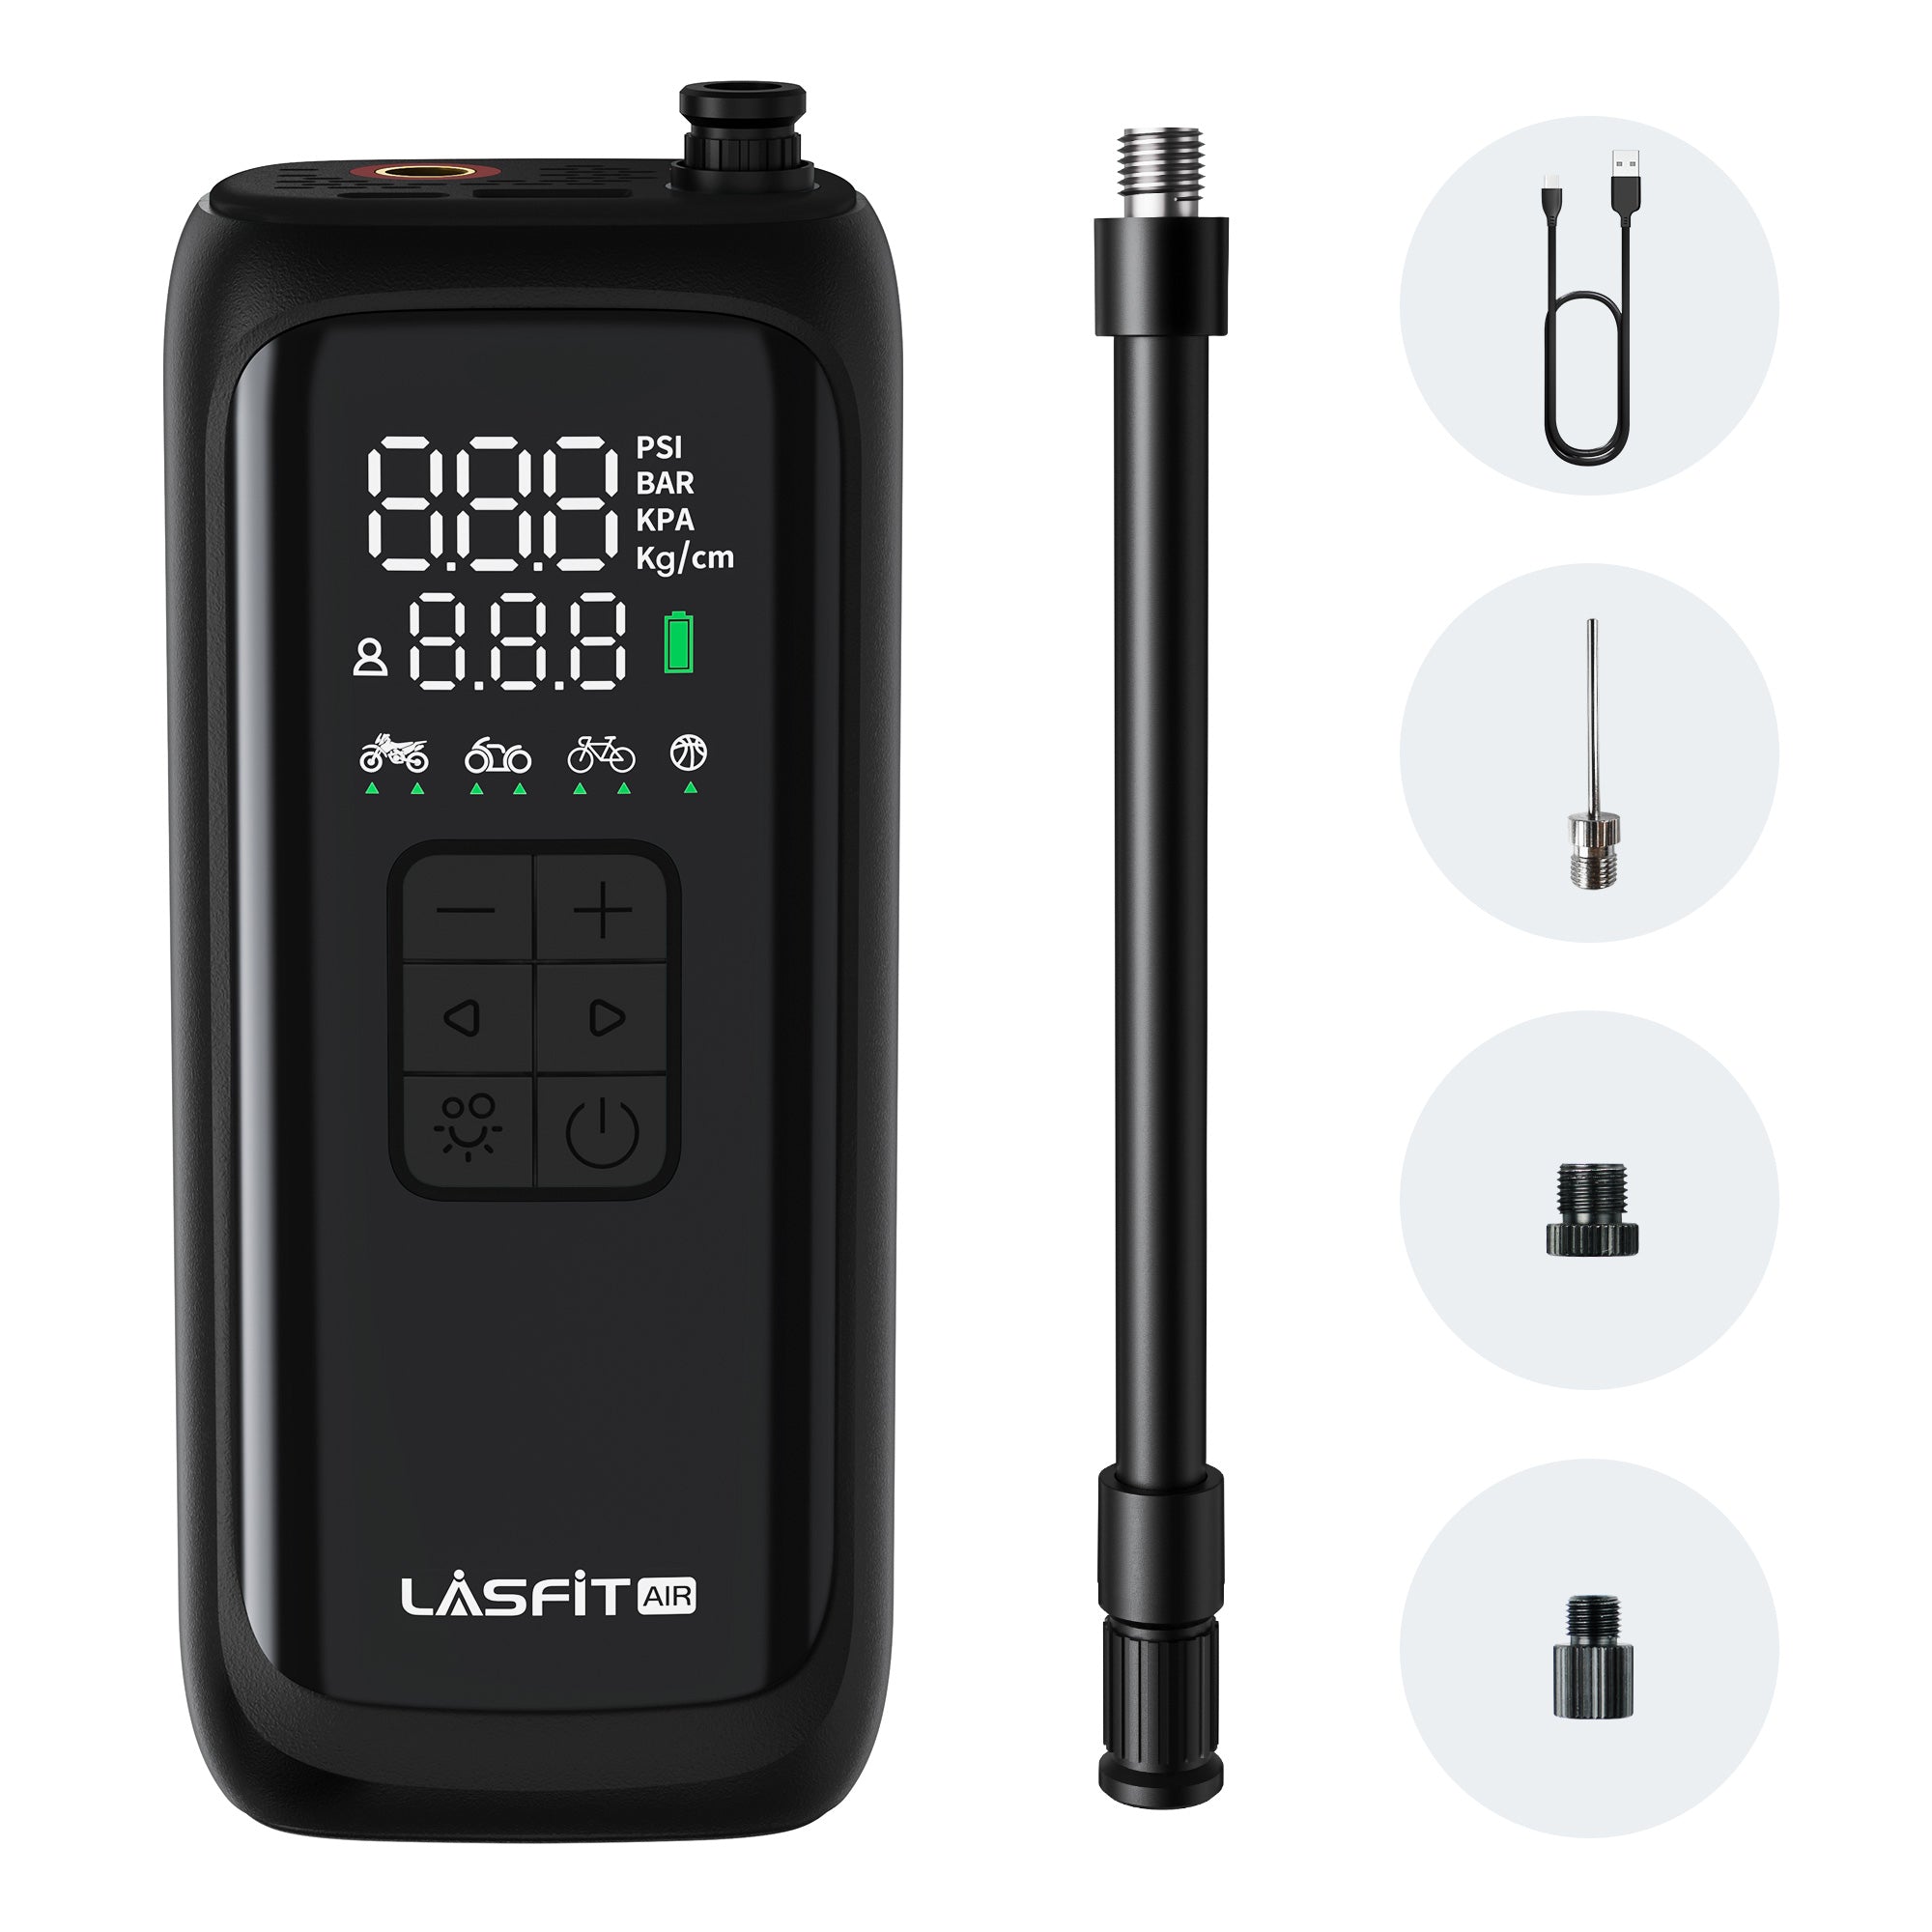 LASFIT AIR BM1 Mini Tire Inflator for Riders, for Bike & Motorcycle: Ride Smoother, Ride Safer!